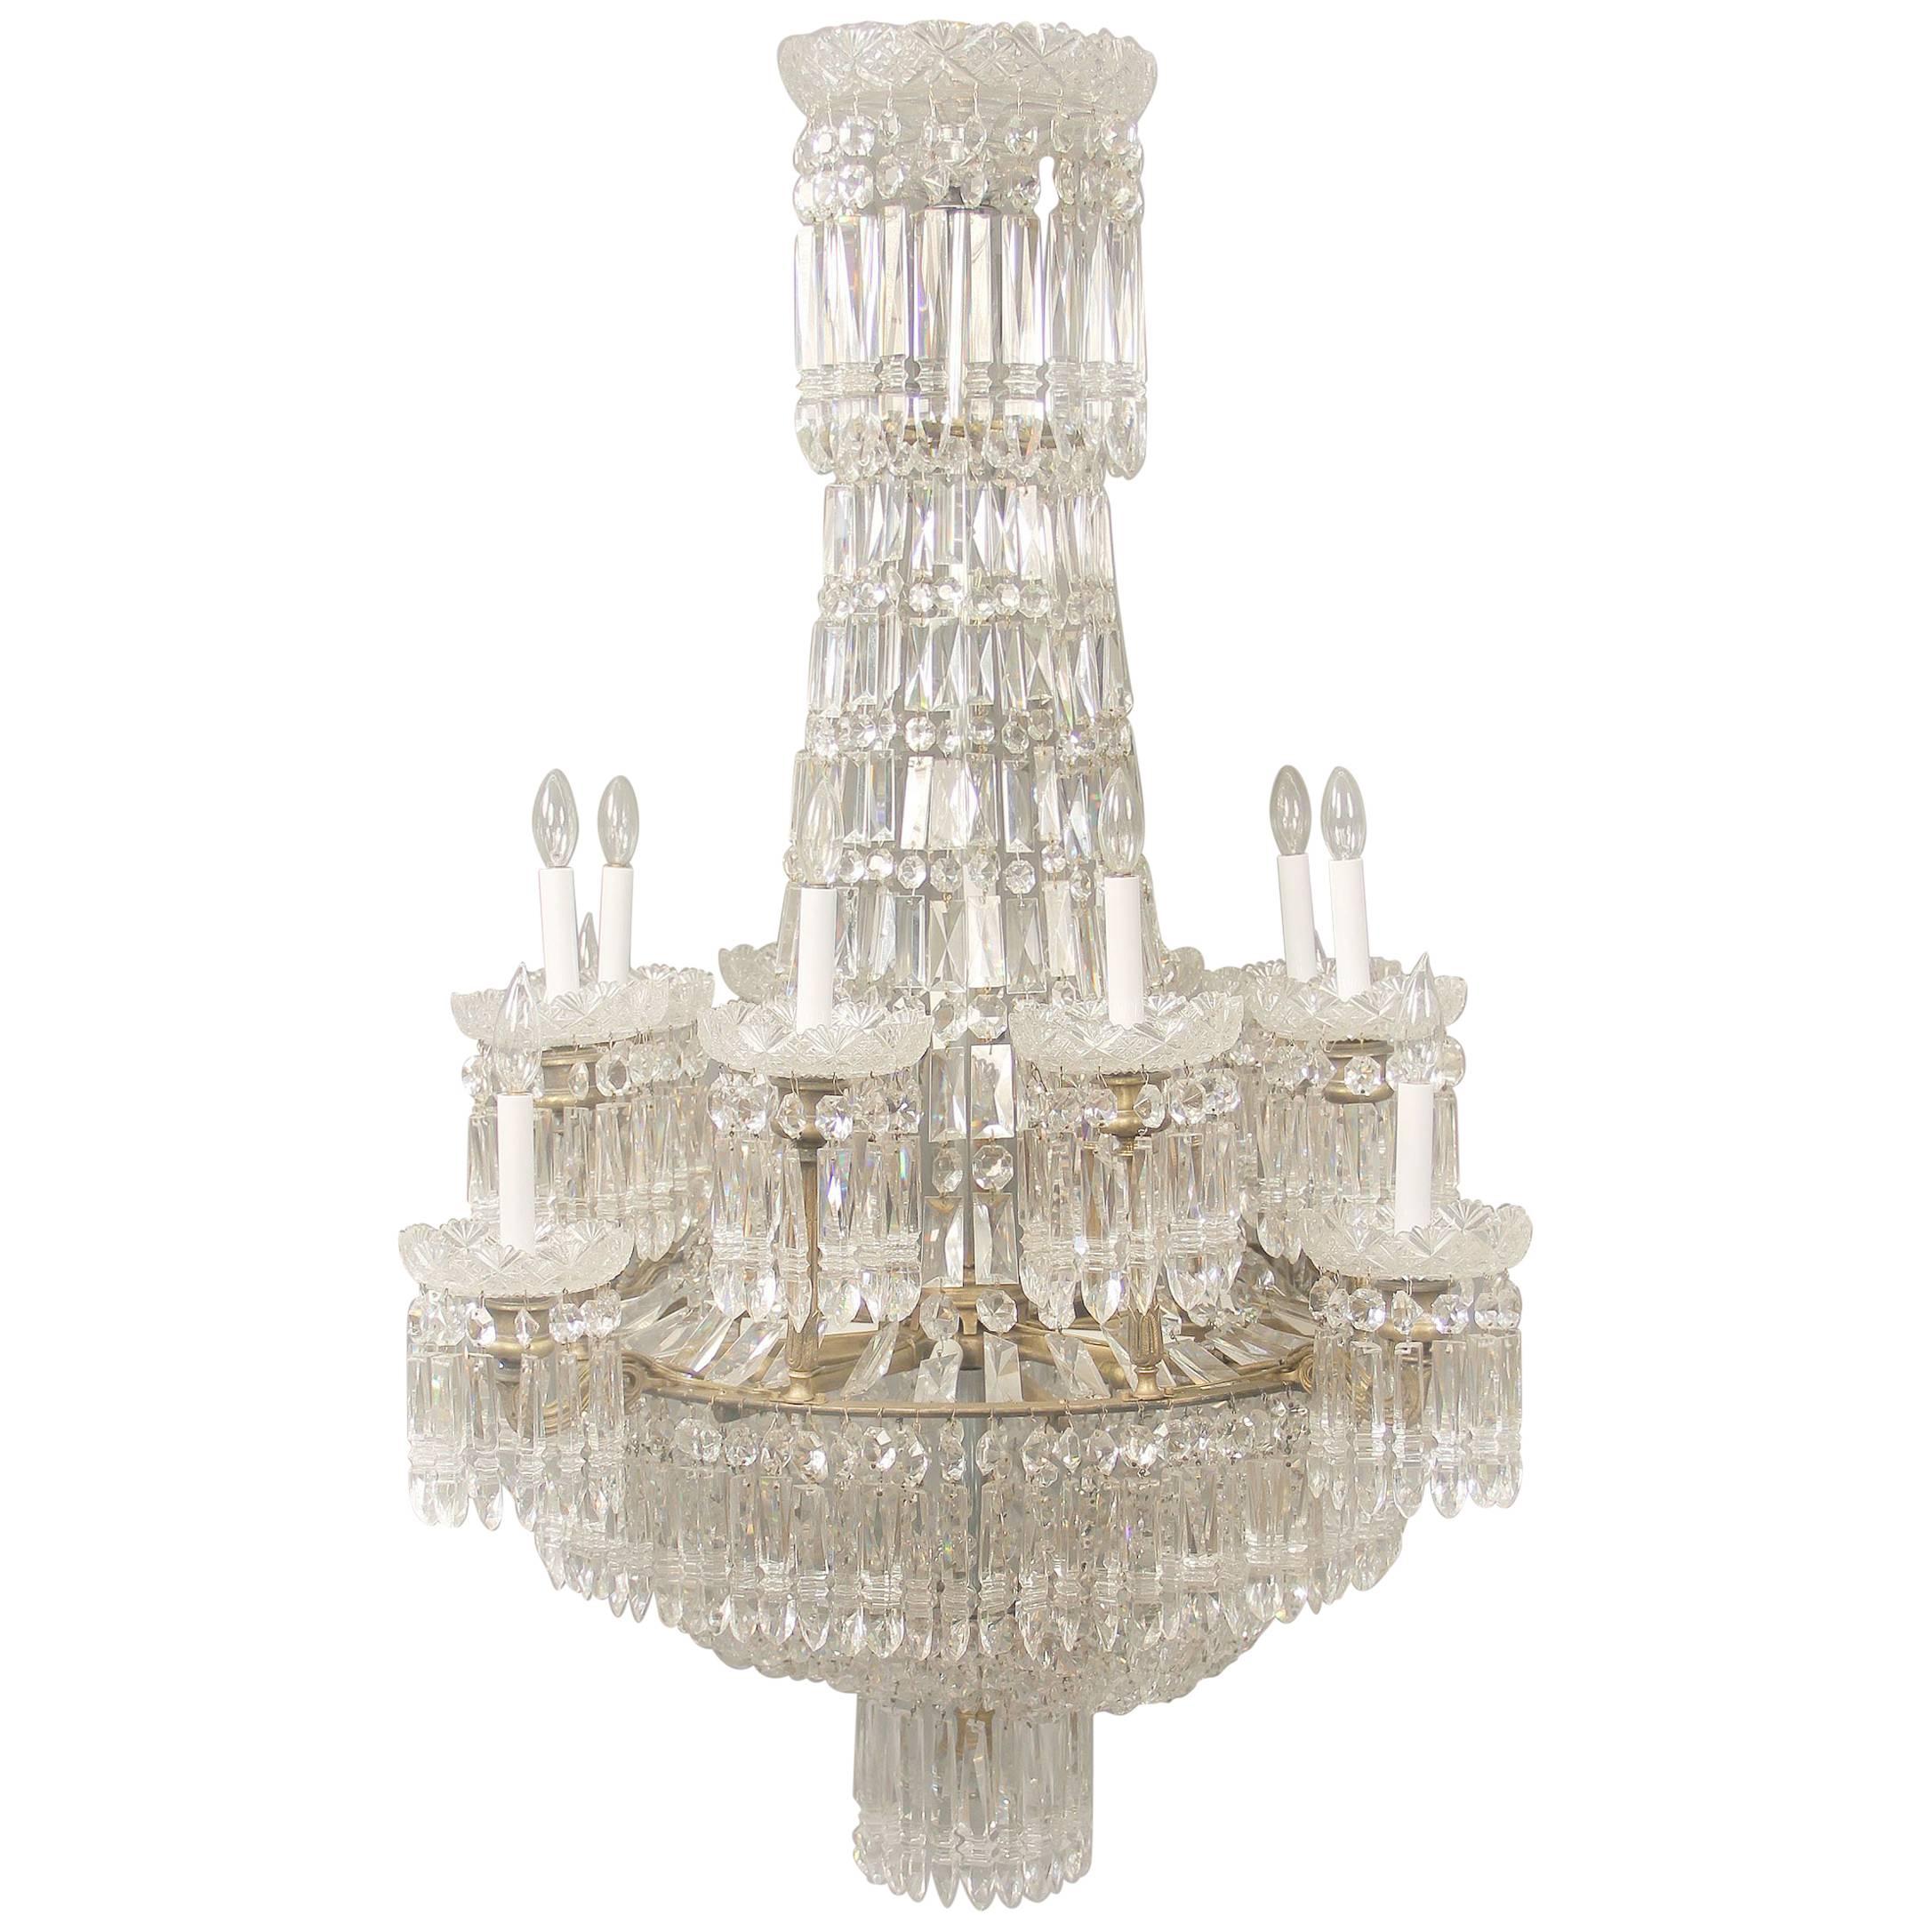 Exceptional Early 19th Century Waterford Crystal Eighteen-Light Chandelier